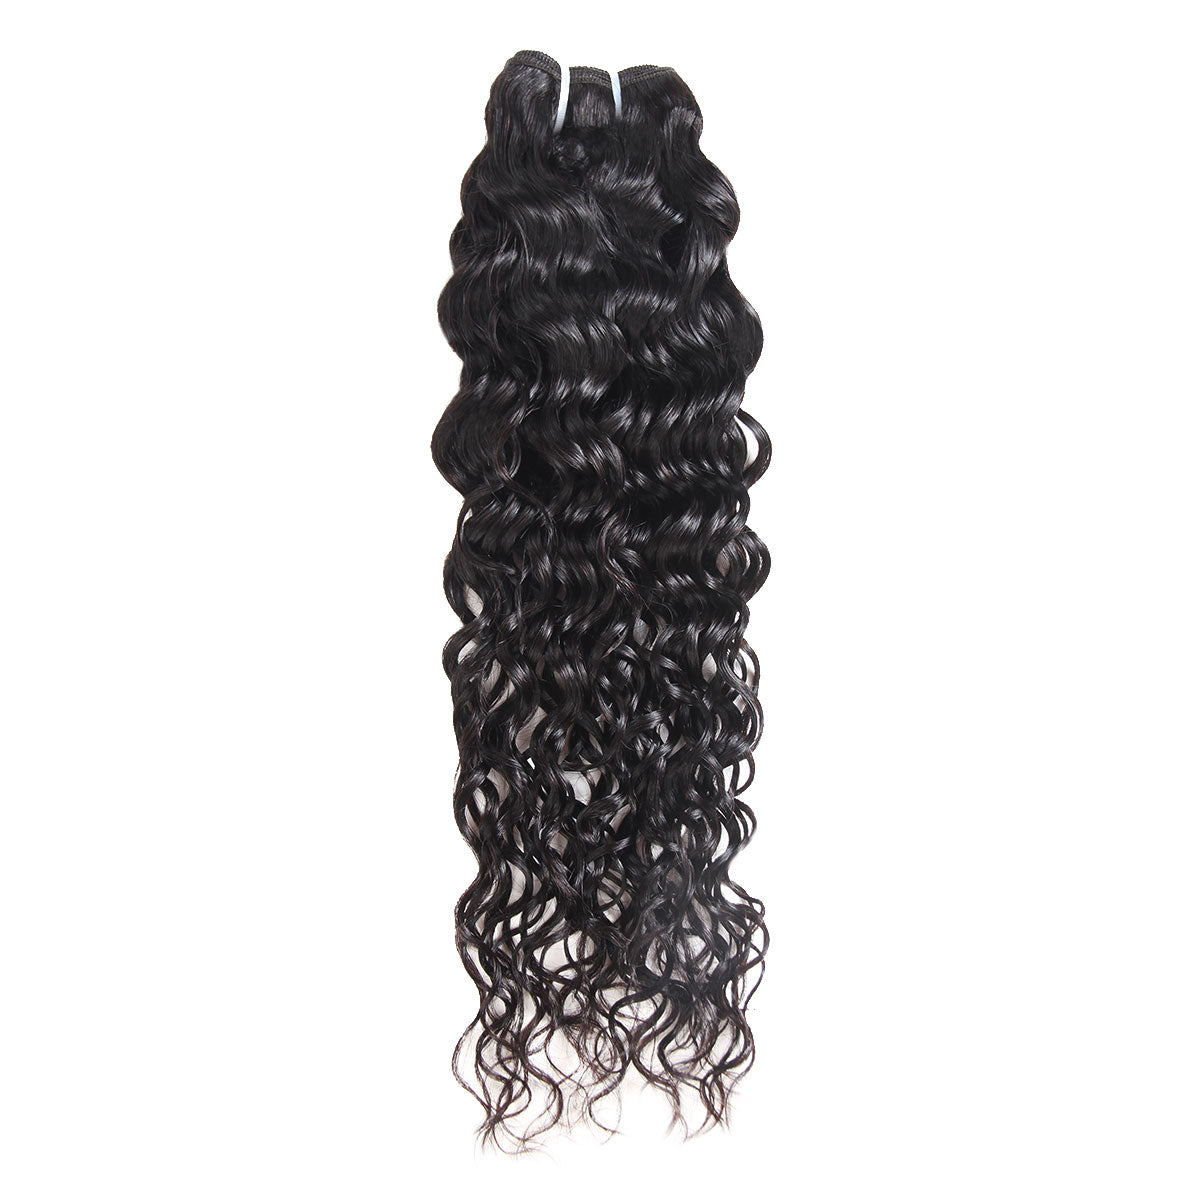 Ishow Water Wave Human Hair Weave Bundles 1pc Natural Black Non Remy H ...